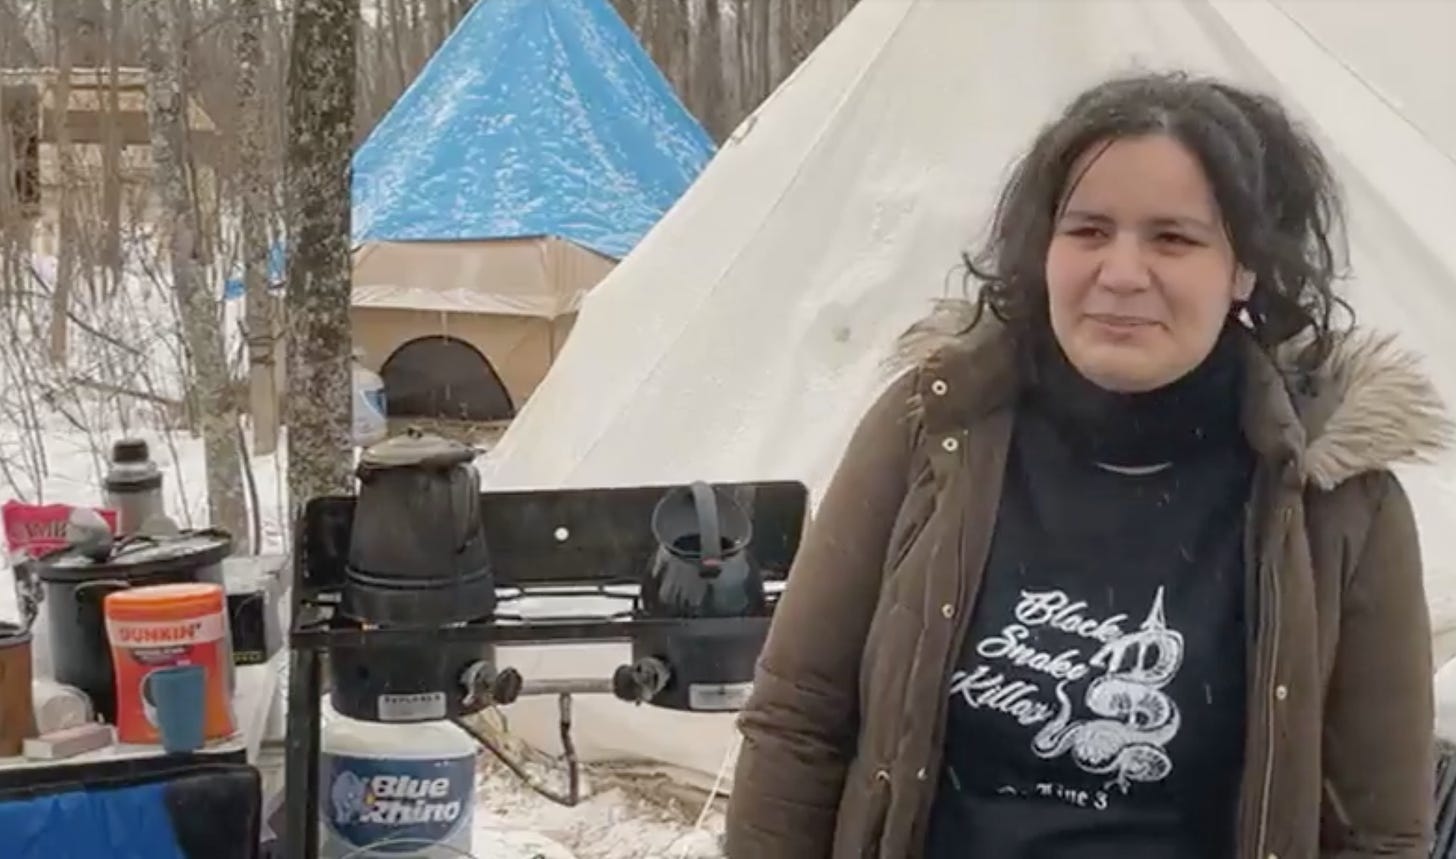 A woman in a black sweater and brown coat, stands in front of a campsite with a gas stove and two tents in the snow